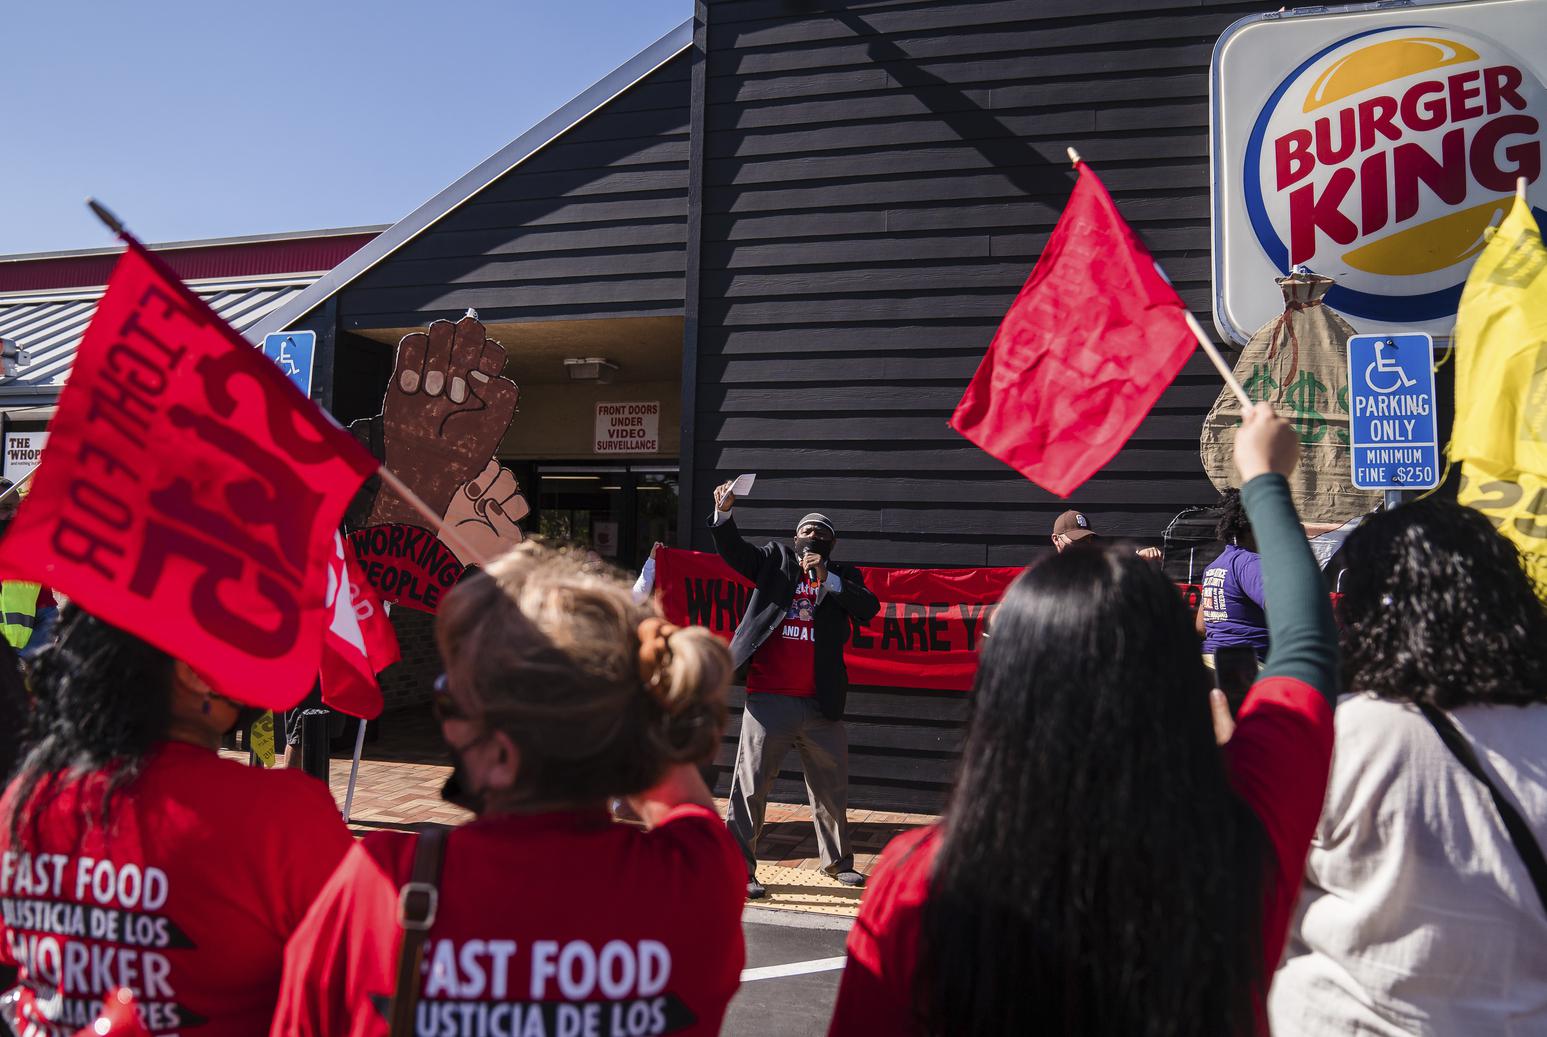 Worker empowerment or government overreach? California’s fast food bill tests labor laws